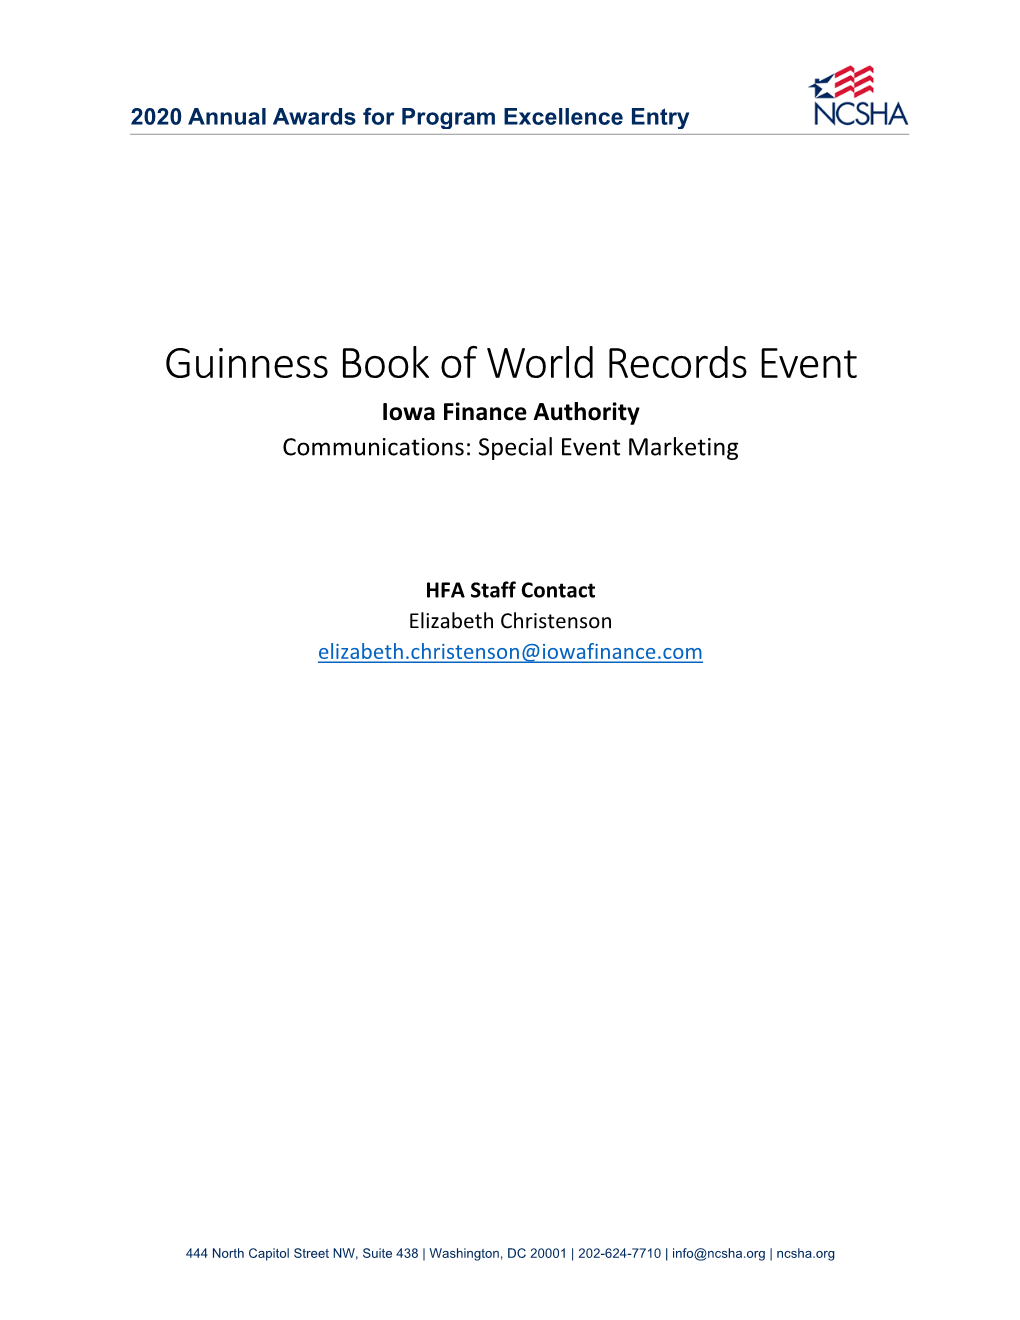 Guinness Book of World Records Event Iowa Finance Authority Communications: Special Event Marketing